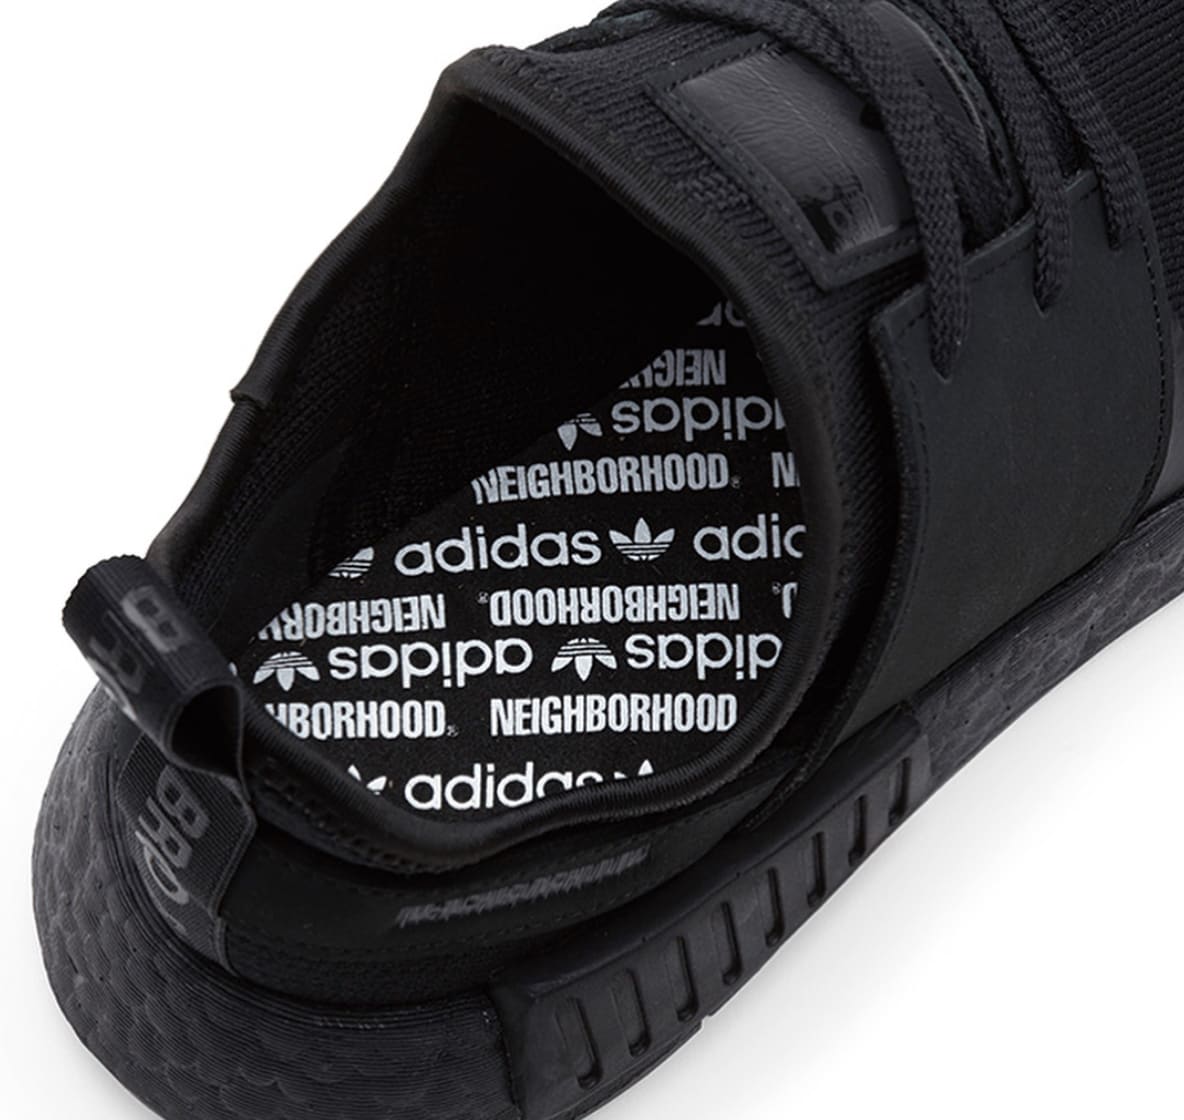 A 'Triple Black' of NMD | Complex